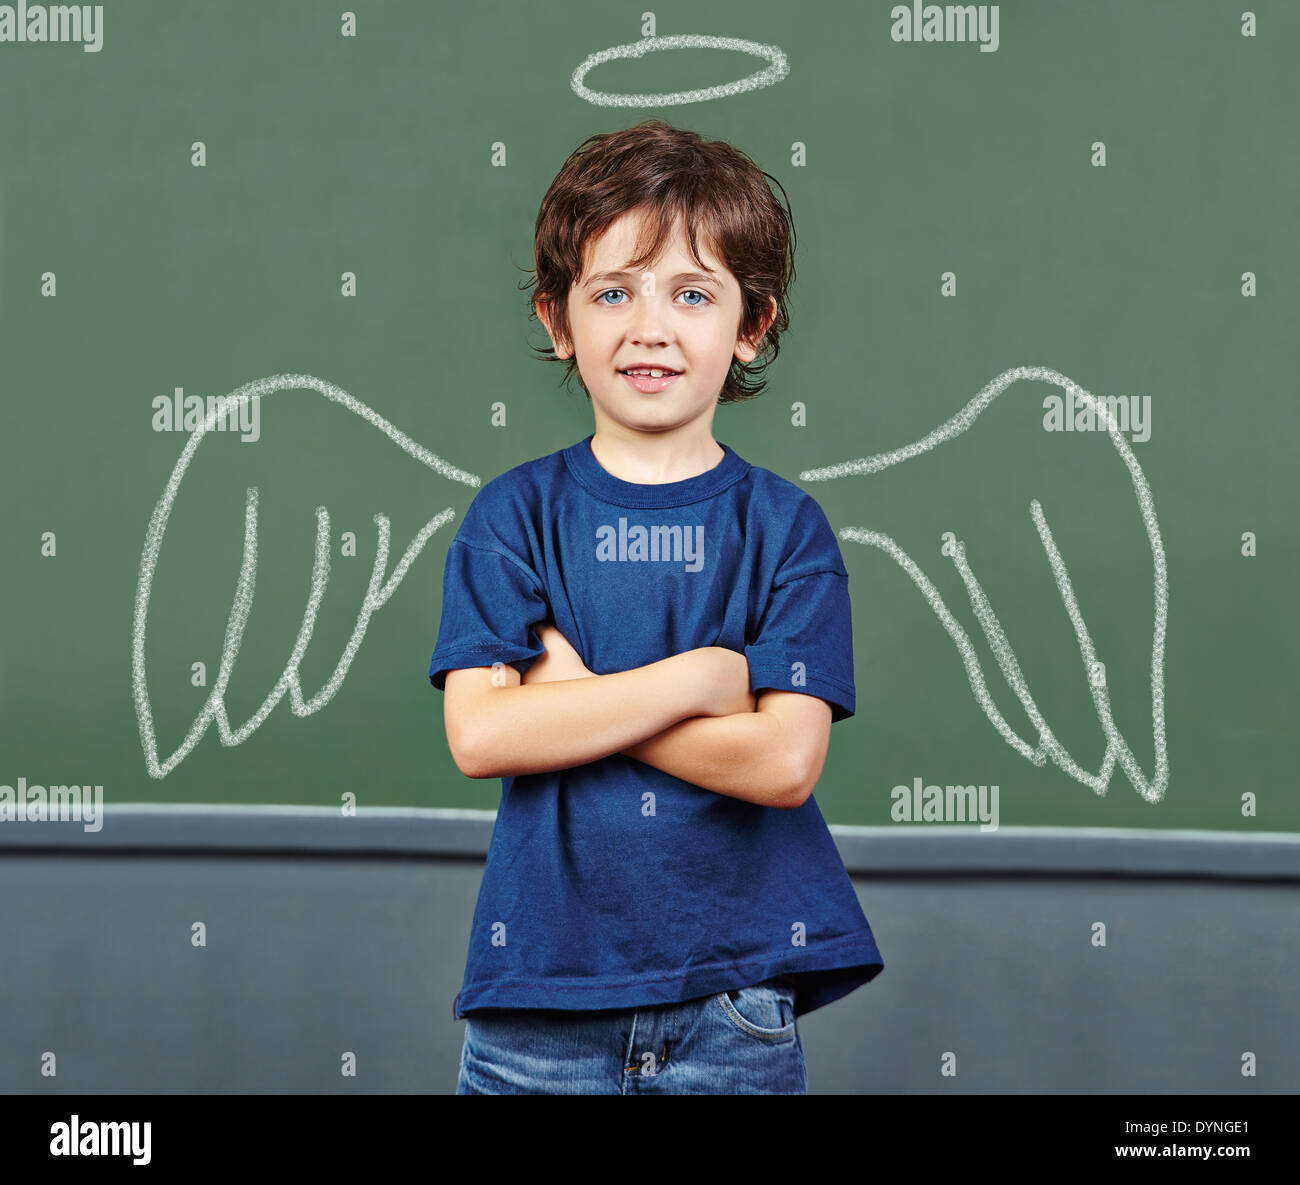 Cute child with wings and halo as guardian angel Stock Photo